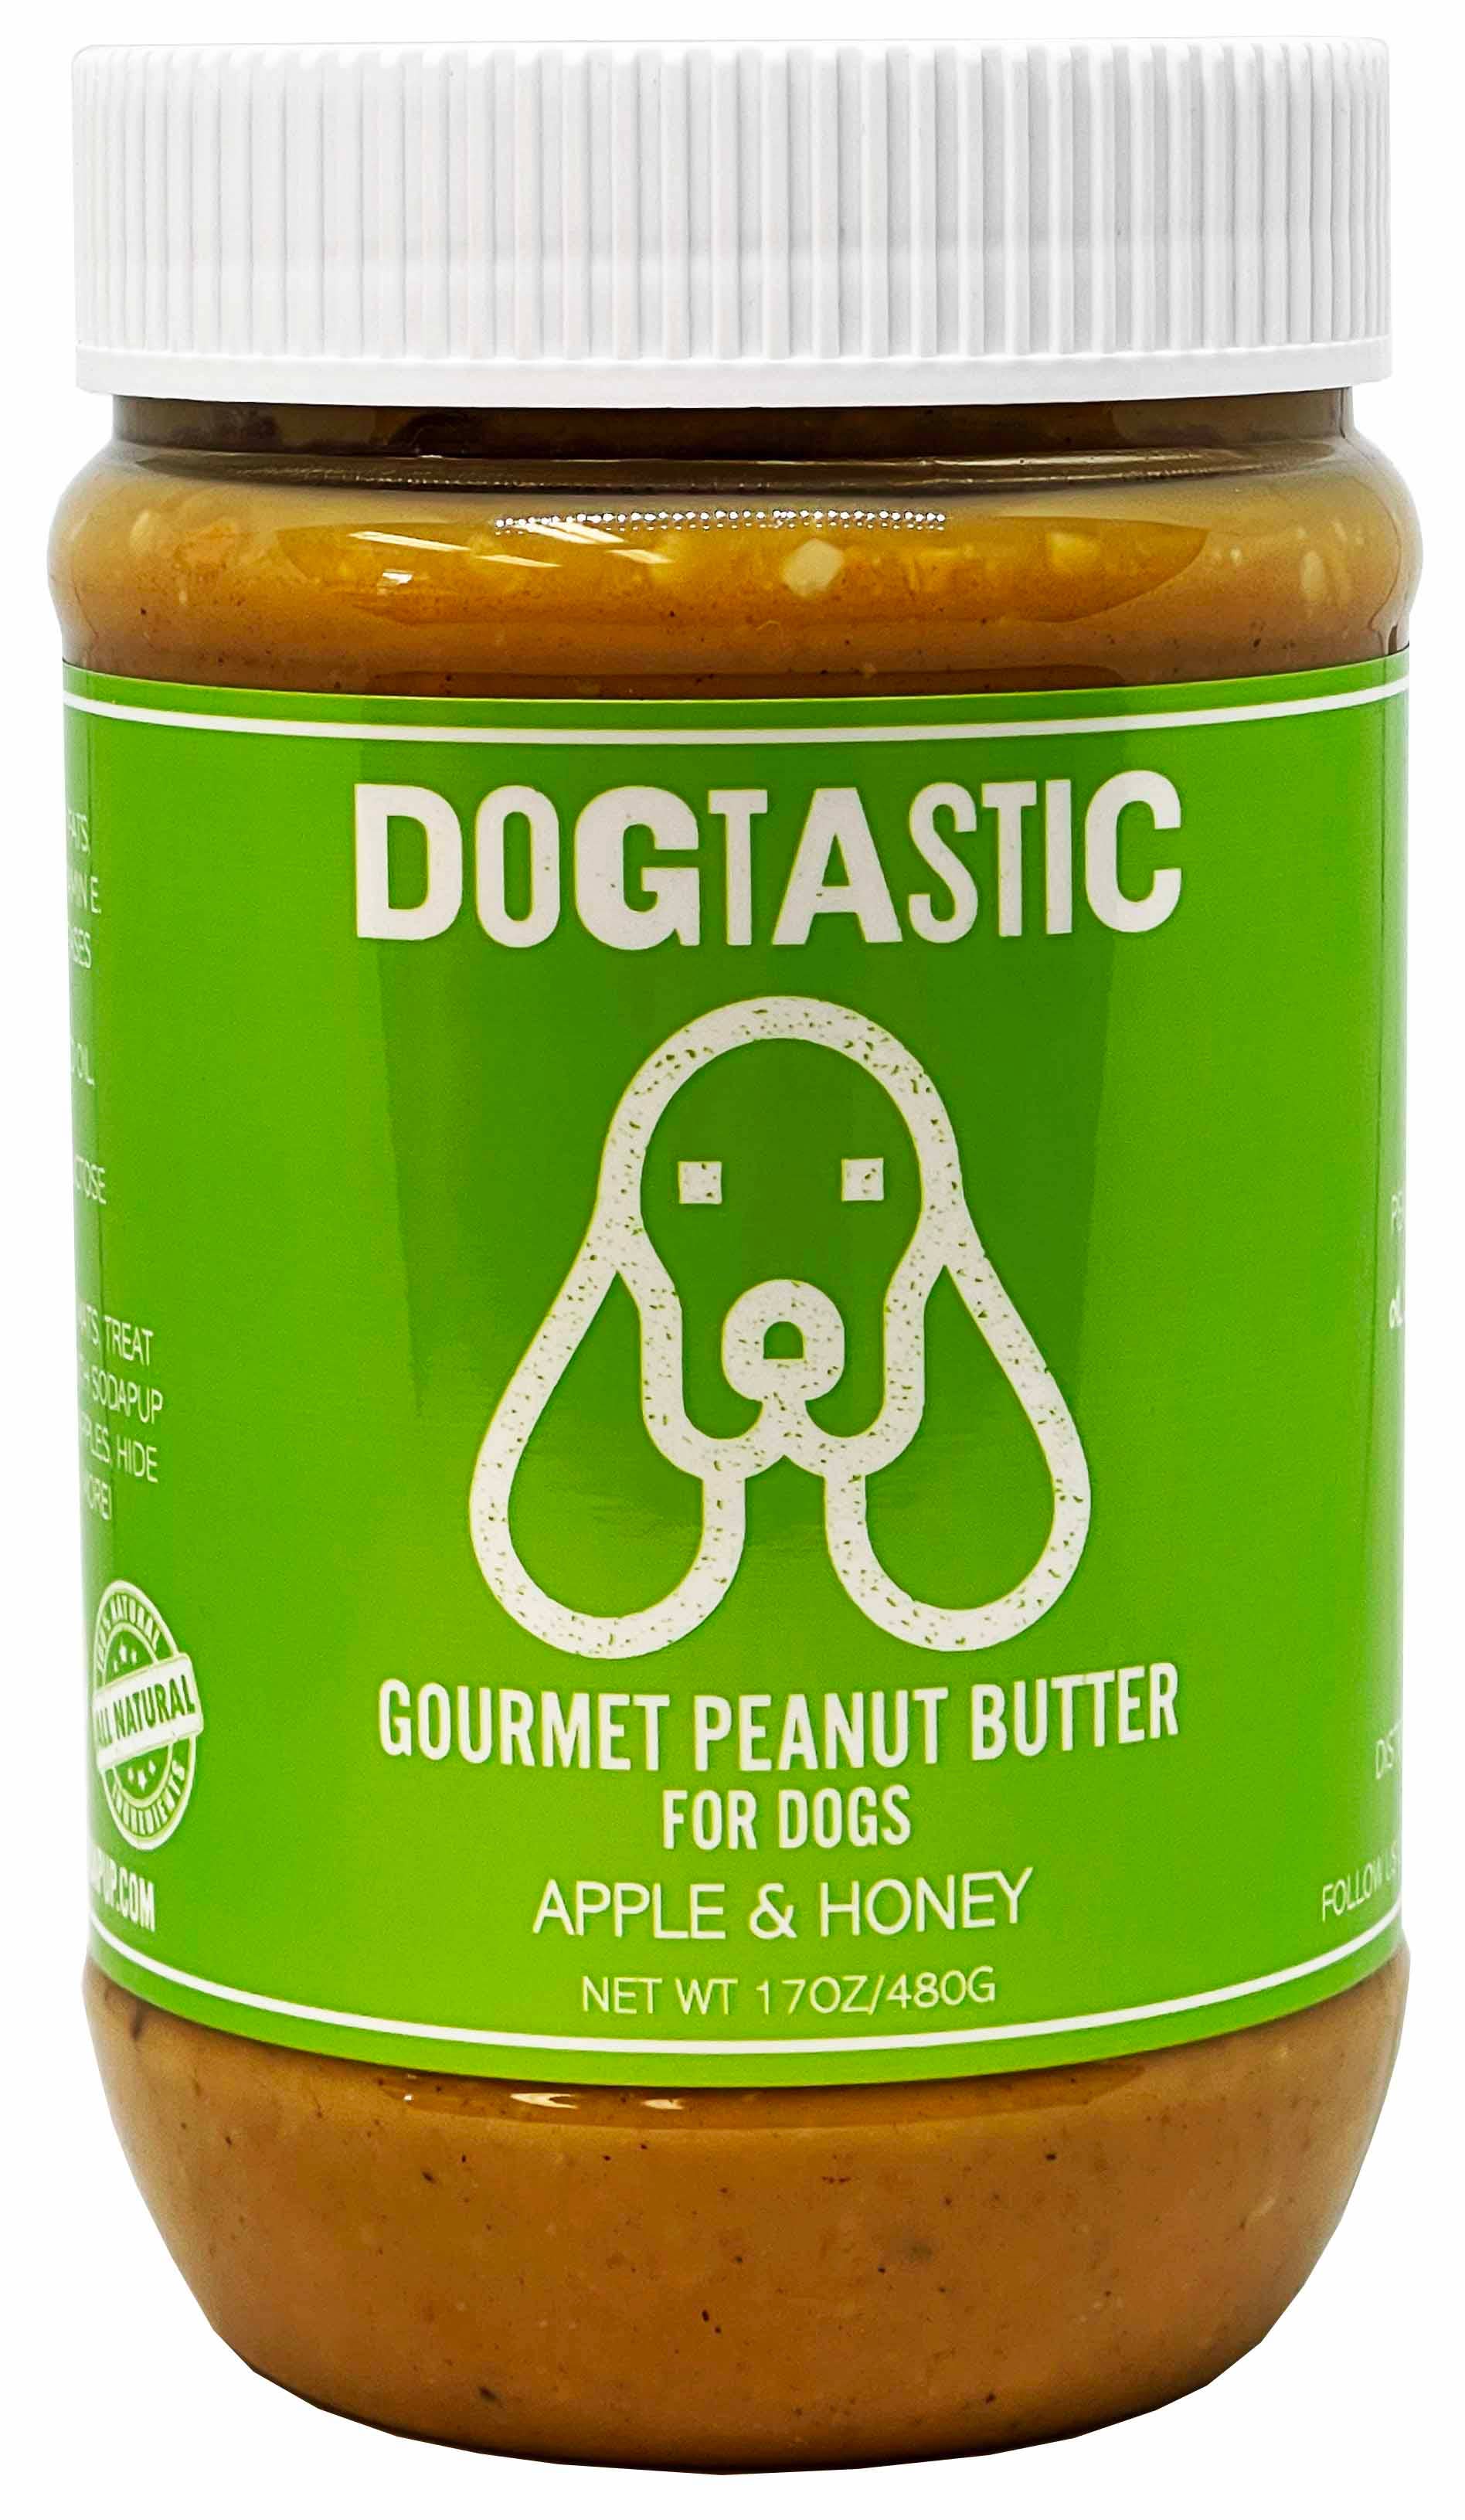 SodaPup - Dogtastic Gourmet Peanut Butter for Dogs - Apple & Honey Flavor